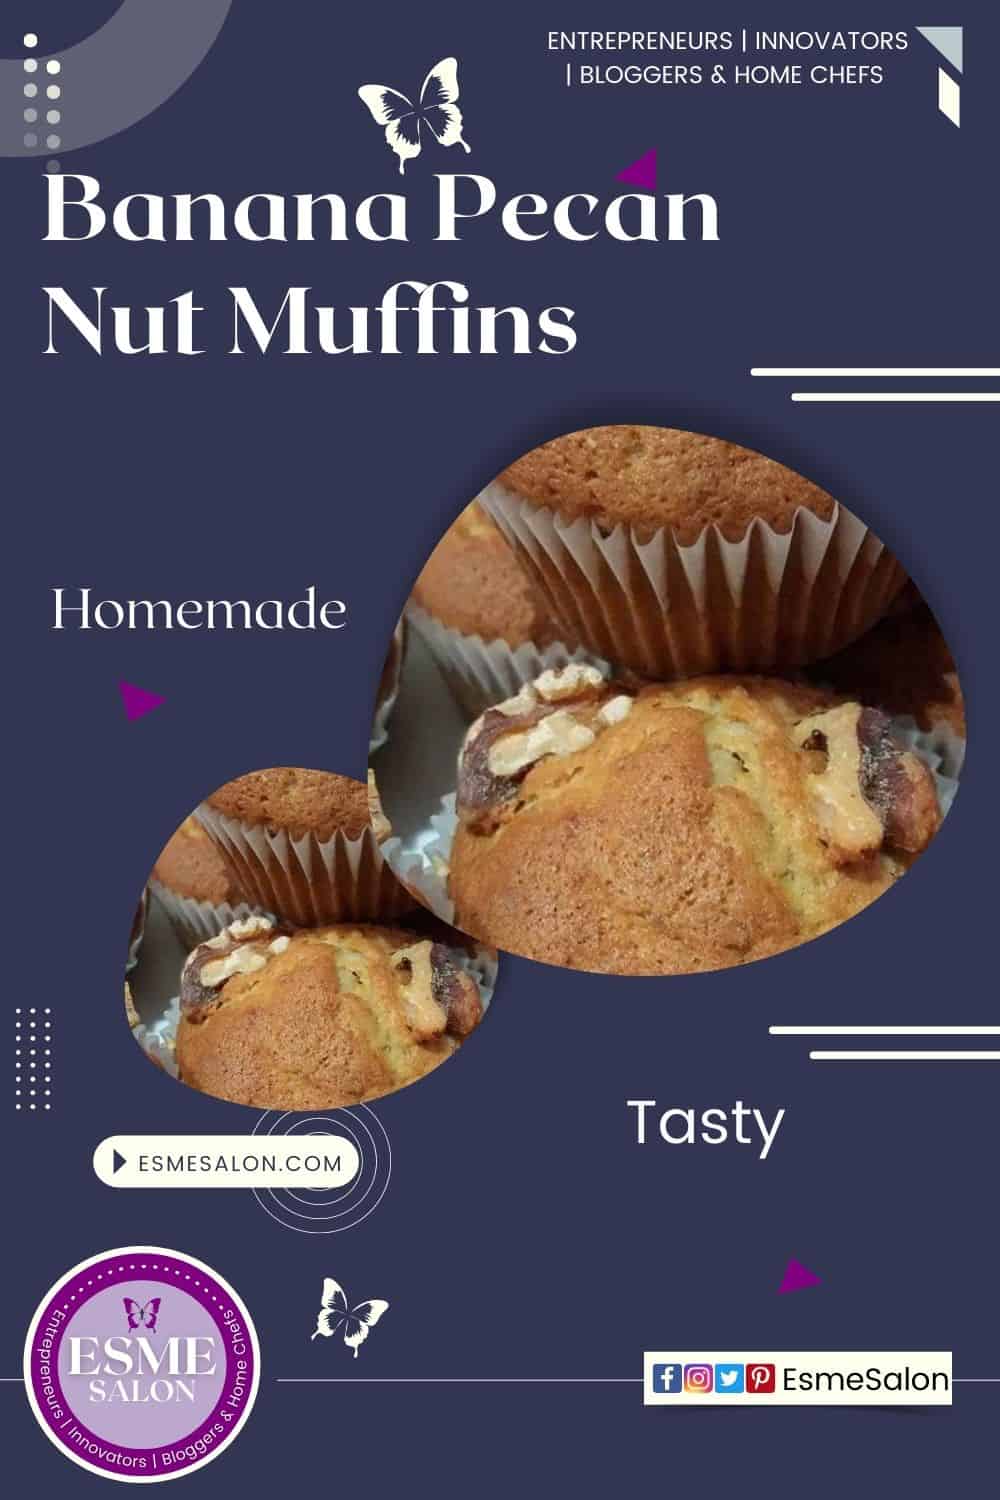 An image of two Easy Banana Pecan Nut Muffins